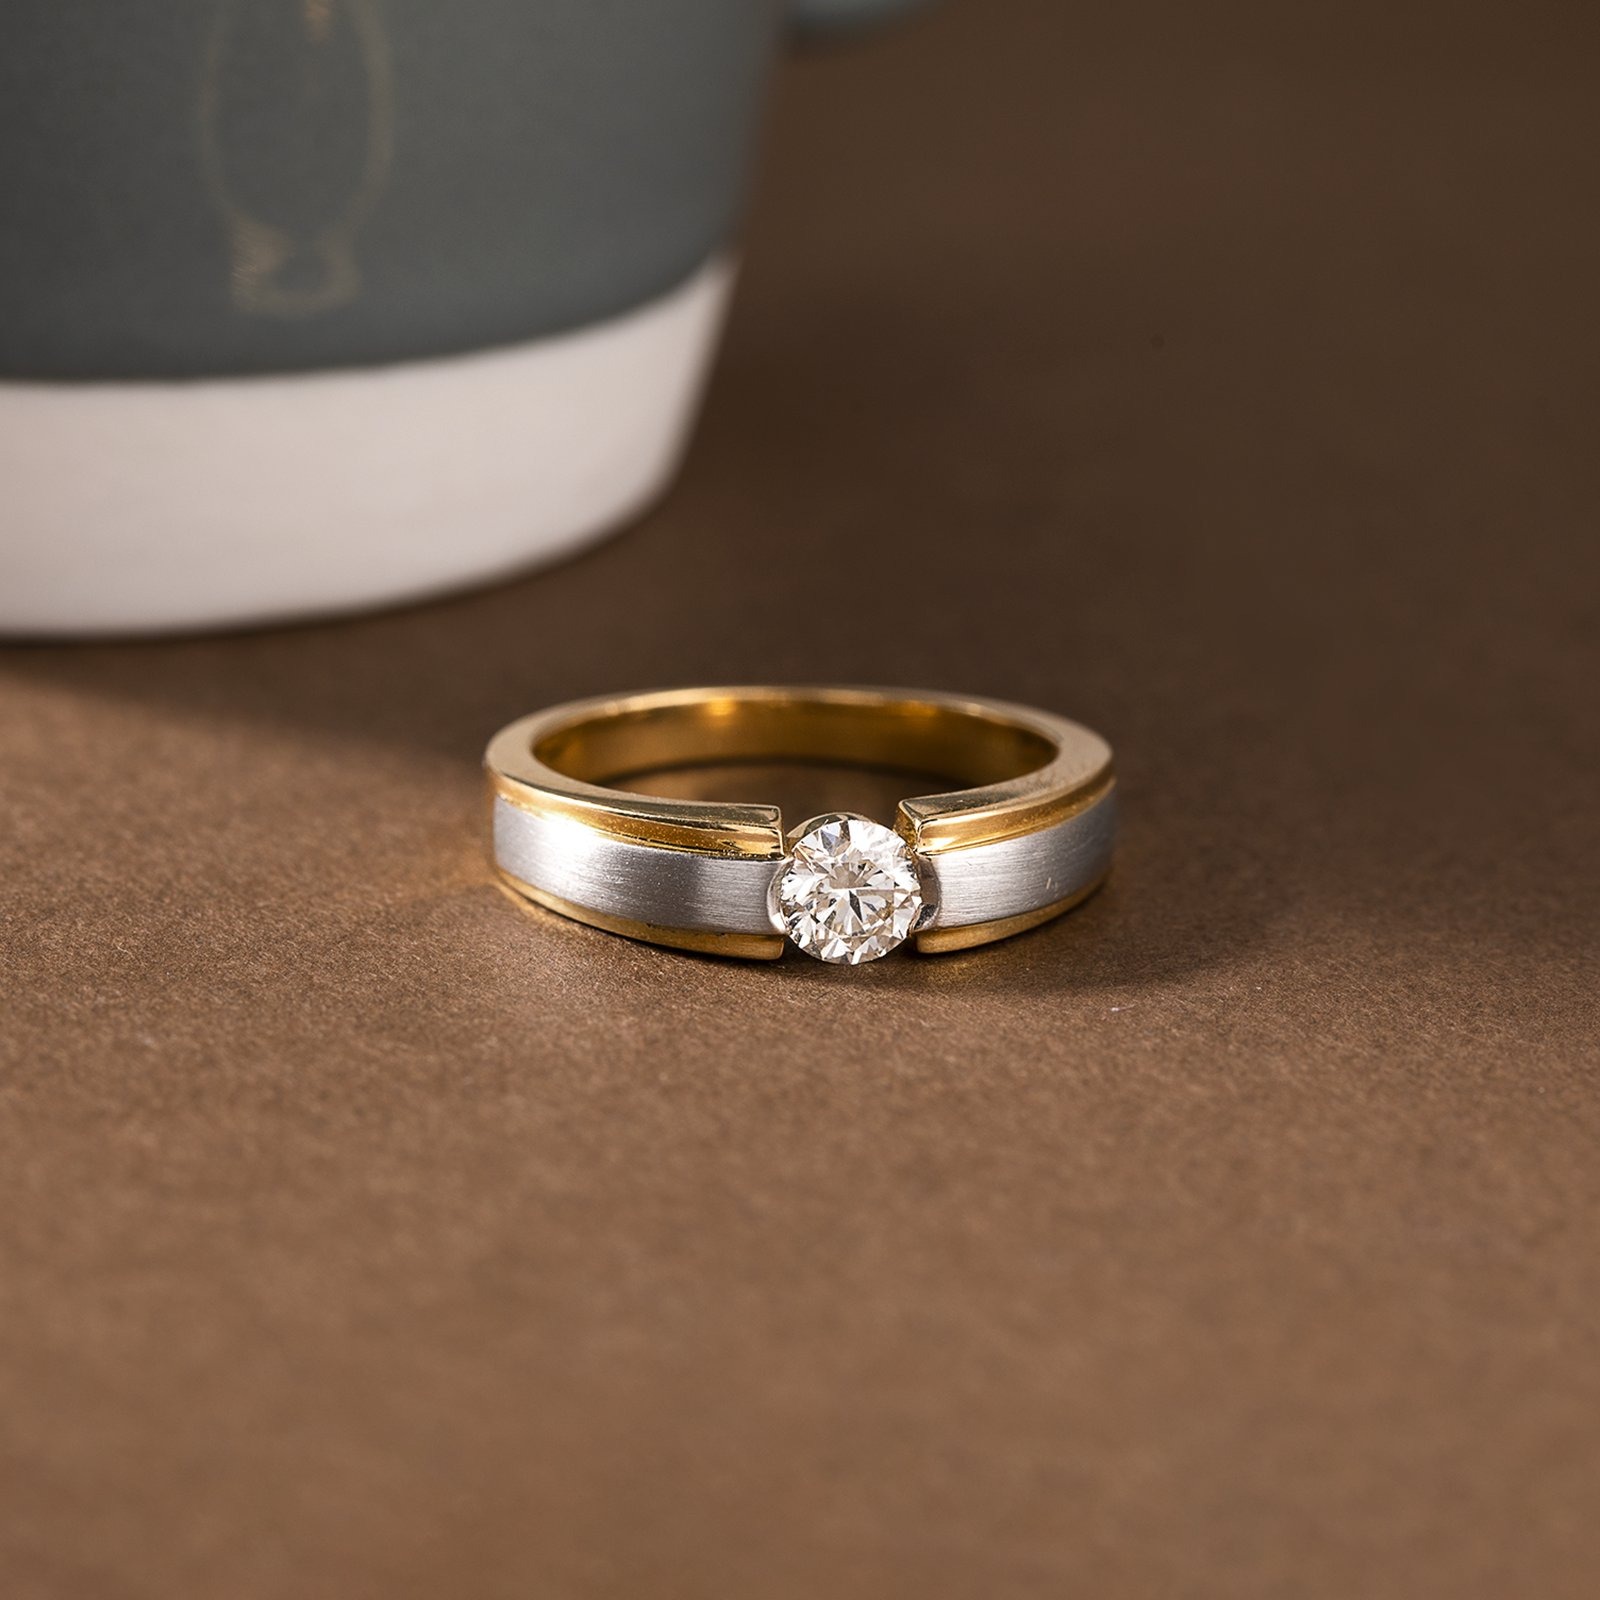 Coordinating Engagement Rings and Wedding Bands | Jared